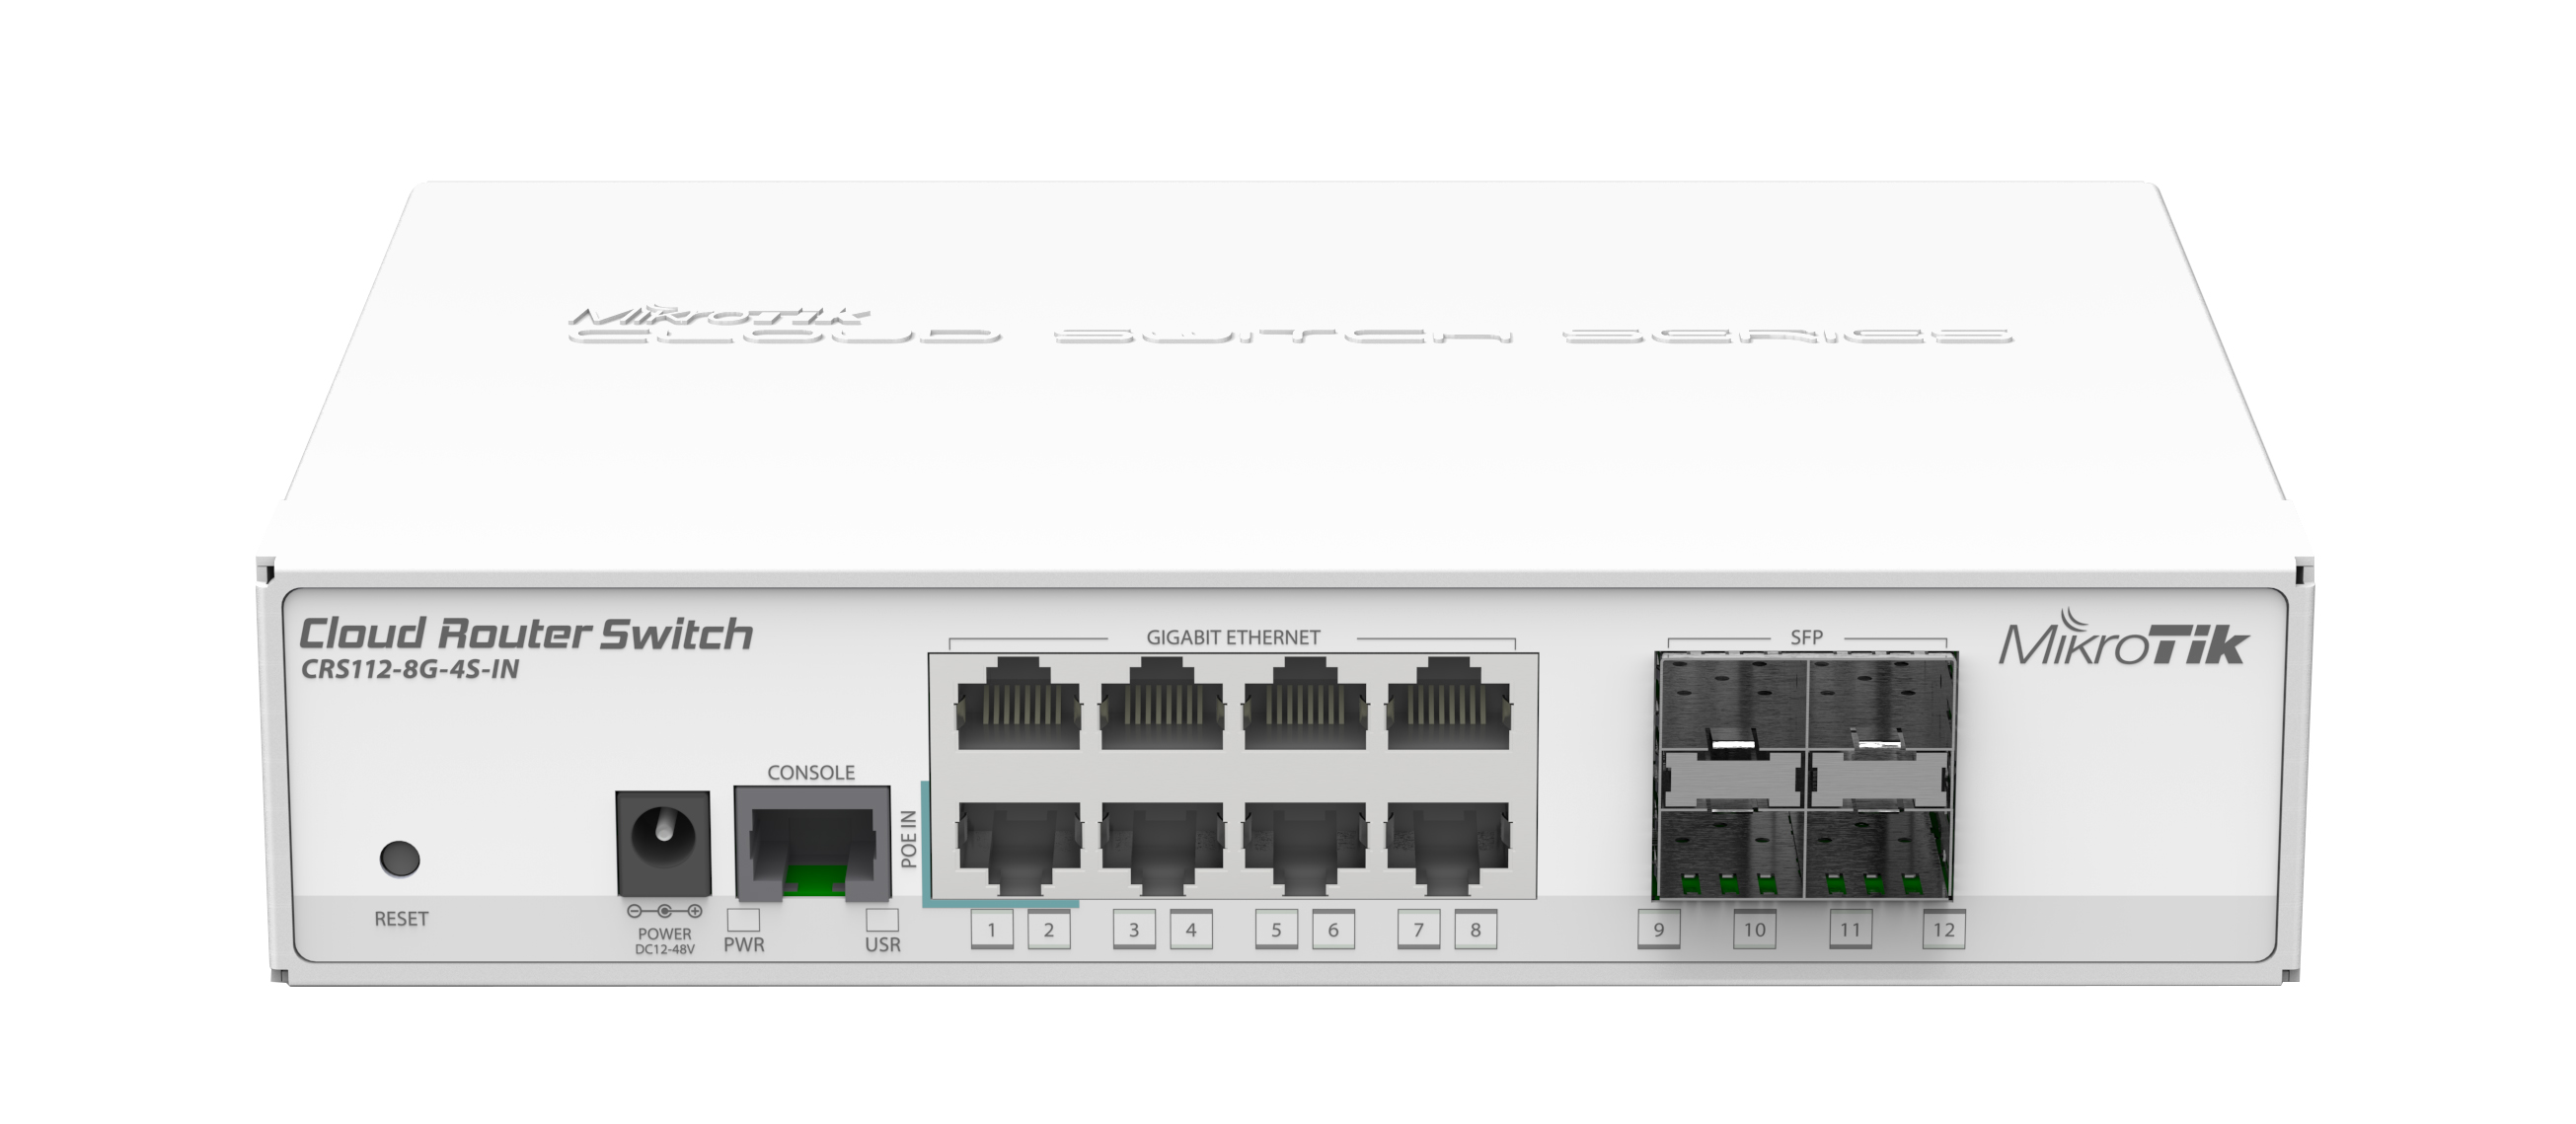 MikroTik Cloud Router Switch CRS112-8G-4S-IN